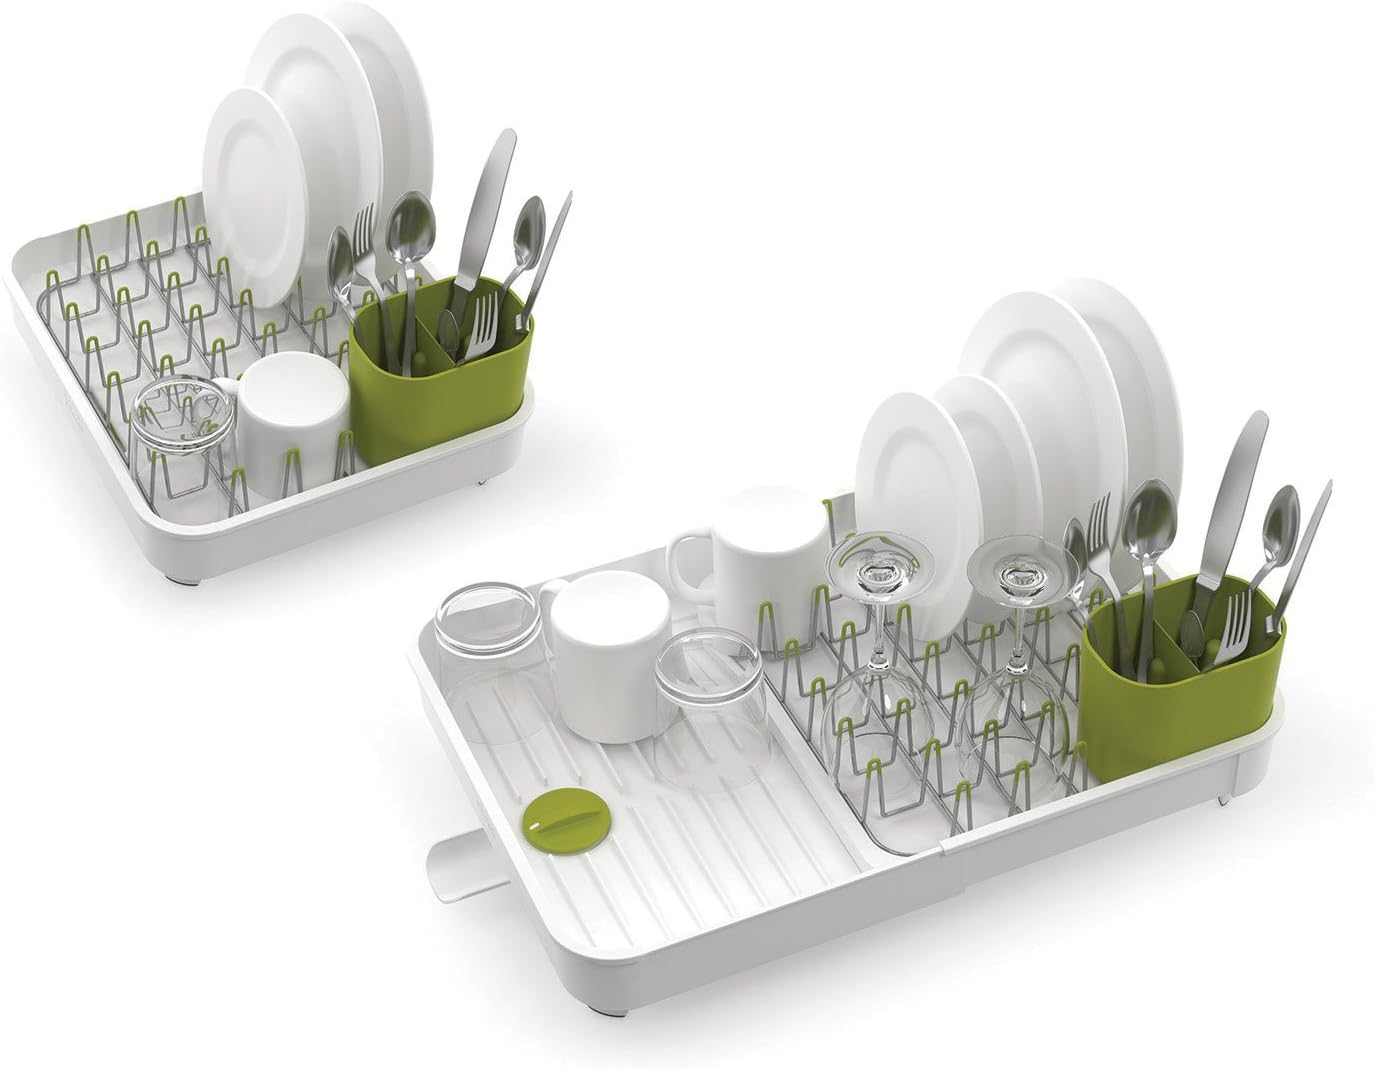 https://bigbigmart.com/wp-content/uploads/2023/10/Joseph-Joseph-85071-Extend-Expandable-Dish-Drying-Rack-and-Drainboard-Set-Foldaway-Integrated-Spout-Drainer-Removable-Steel-Rack-and-Cutlery-Holder-WhiteWhite-Green-Plastic9.jpg